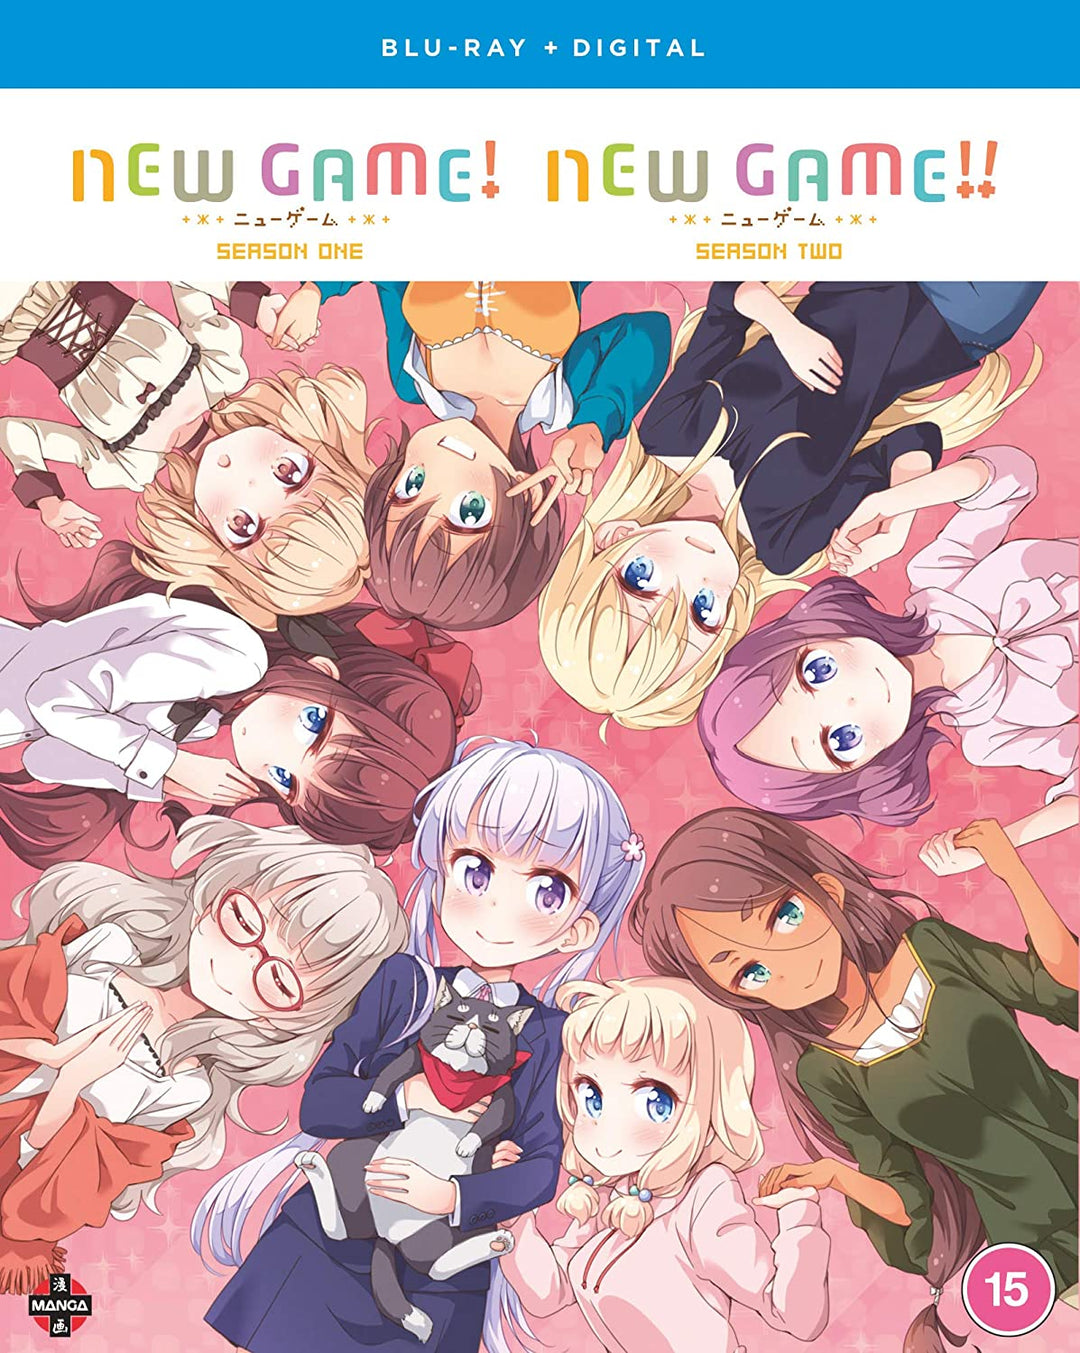 NEW GAME! + NEW GAME!! - Seasons 1 and 2 Free [Blu-ray]